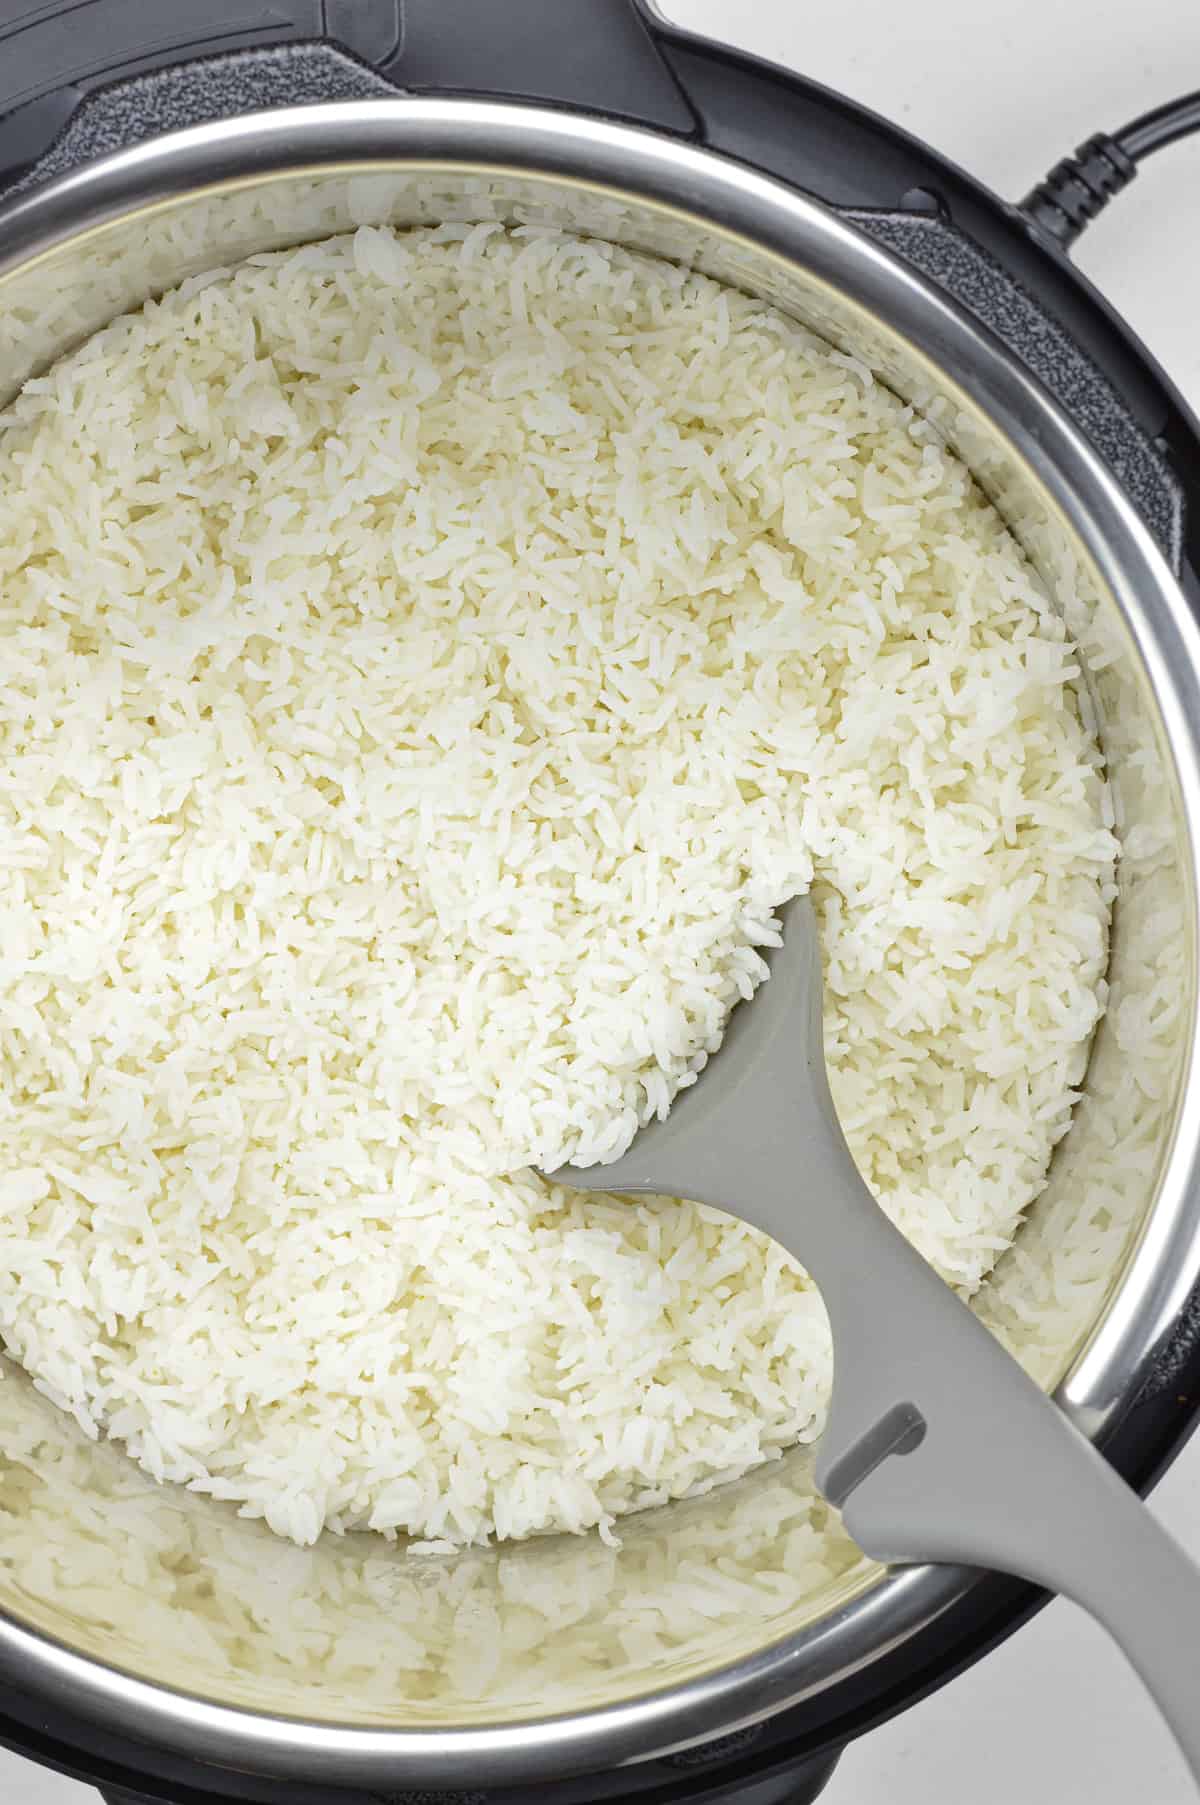 How Long To Cook Brown Rice In An Electric Pressure Cooker